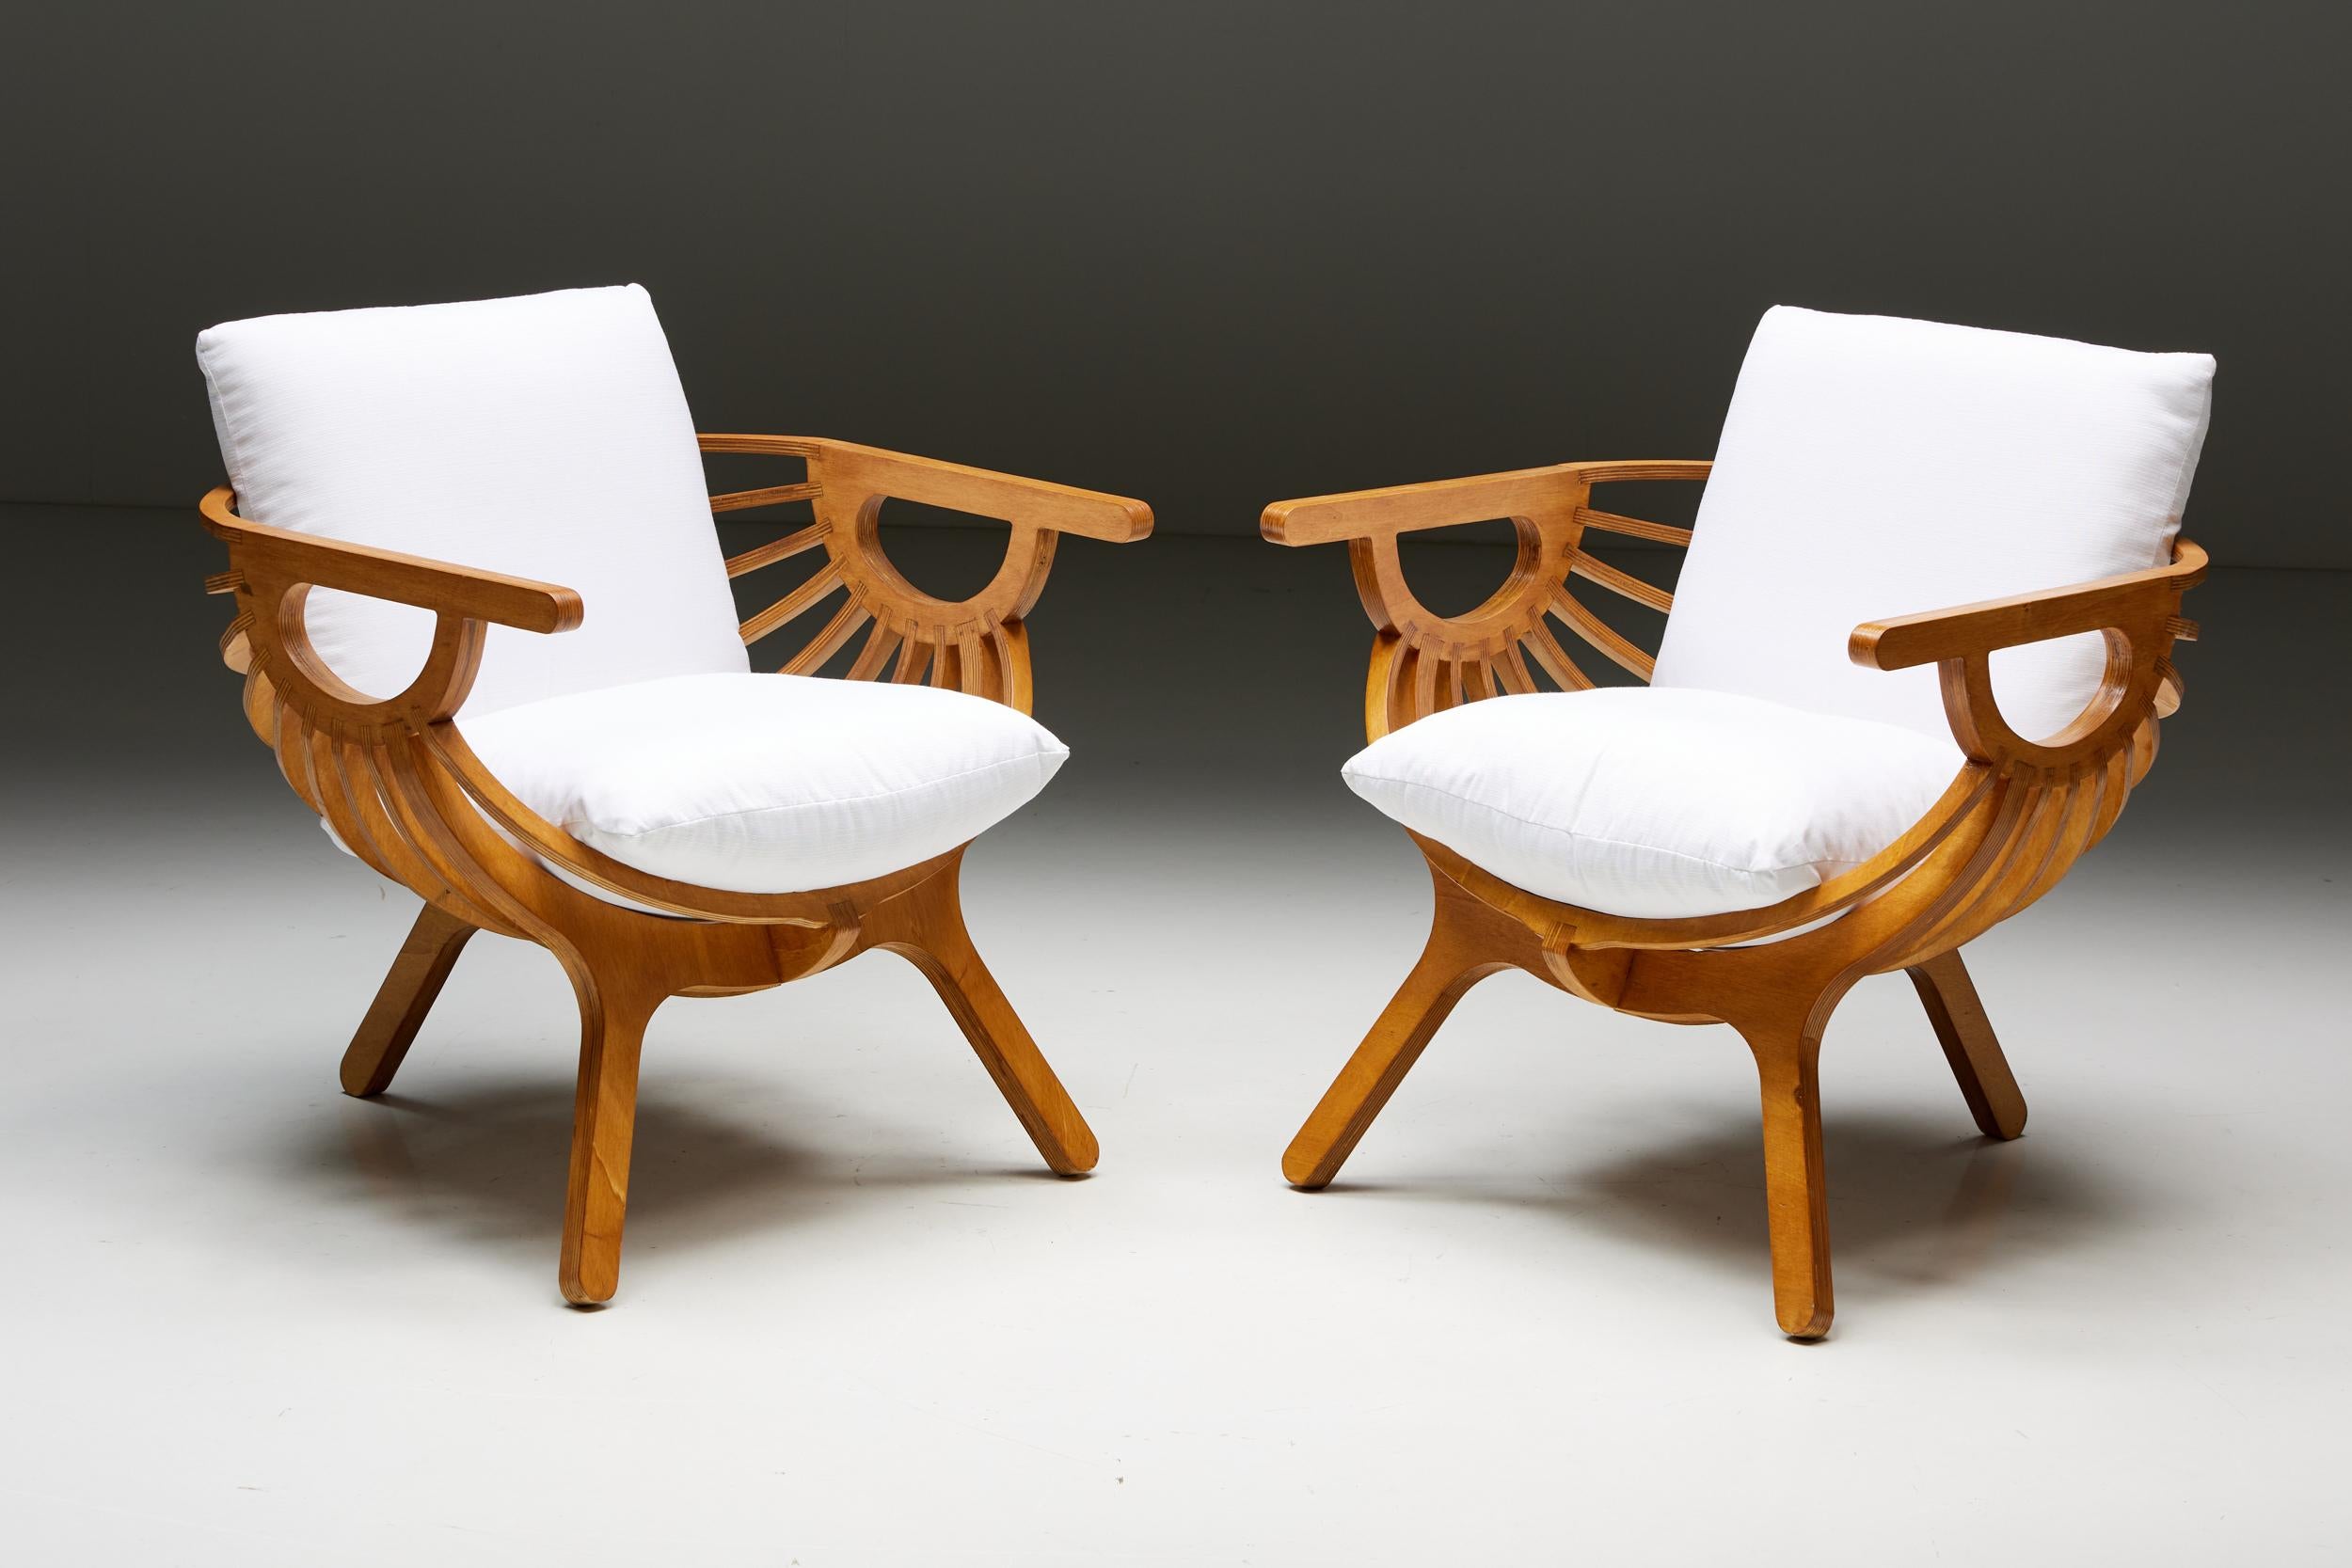 Organic Modern Shell Chair by Marco Sousa Santos for Branca Lisboa, Portugal, 2000s For Sale